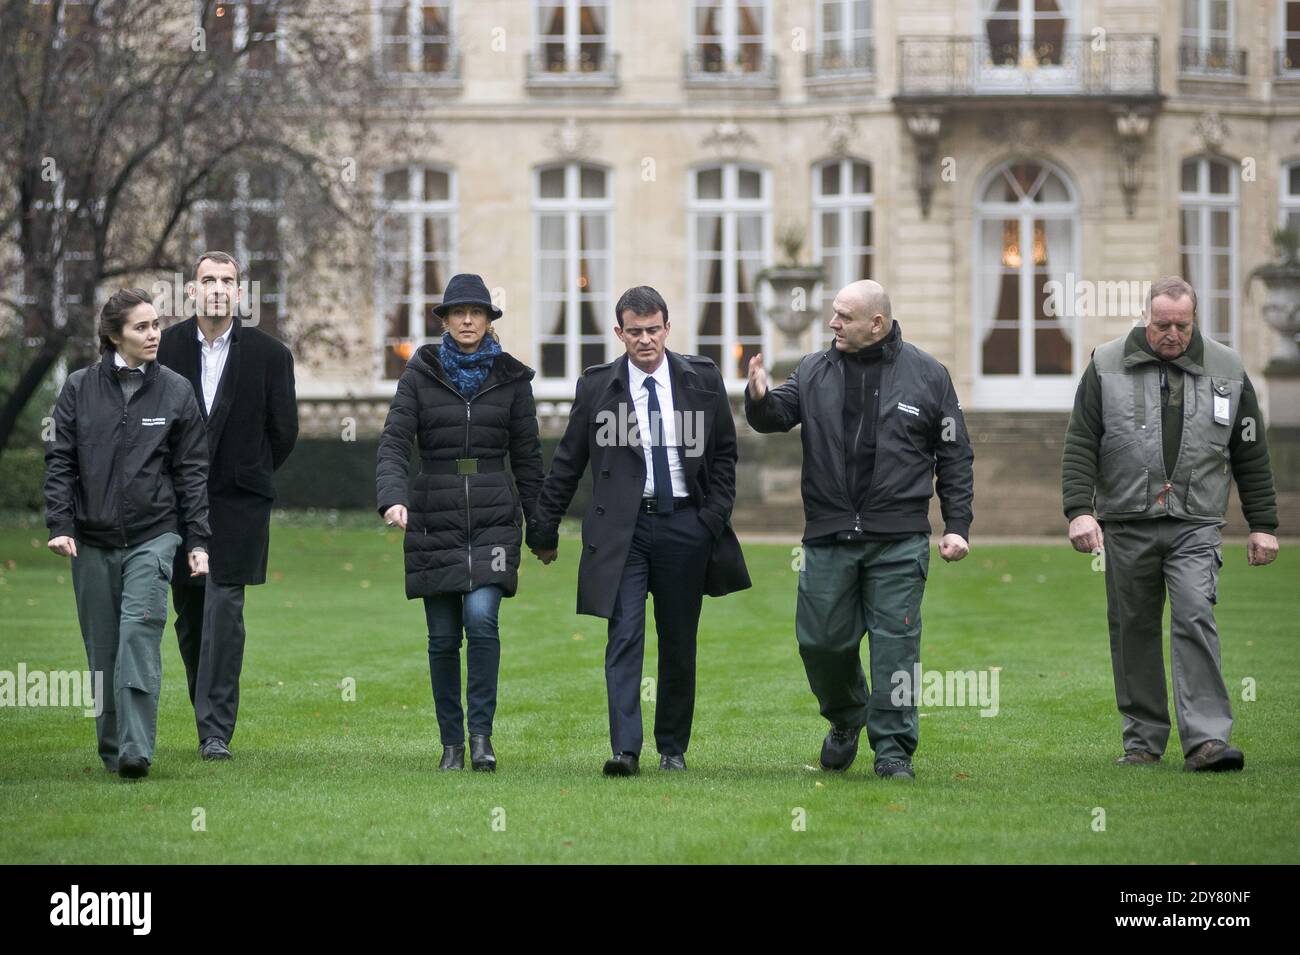 French Prime Minister Manuel Valls arriving along with his wife Anne Gravoin and gardeners to plant the tree called 'of the Prime Minister' - as is the republican tradition - in the gardens of his headquarters Hotel de Matignon in Paris, France on December 16, 2014. The tree, chosen by the Prime Minister, is an oak of the species 'Quercus robur fastigiata' and is located on the front lawn. The tradition of planting a tree at the PM's headquarters was introduced by the late Prime Minister Raymond Barre in 1978. Photo Pool by Nicolas Messyasz/ABACAPRESS.COM Stock Photo